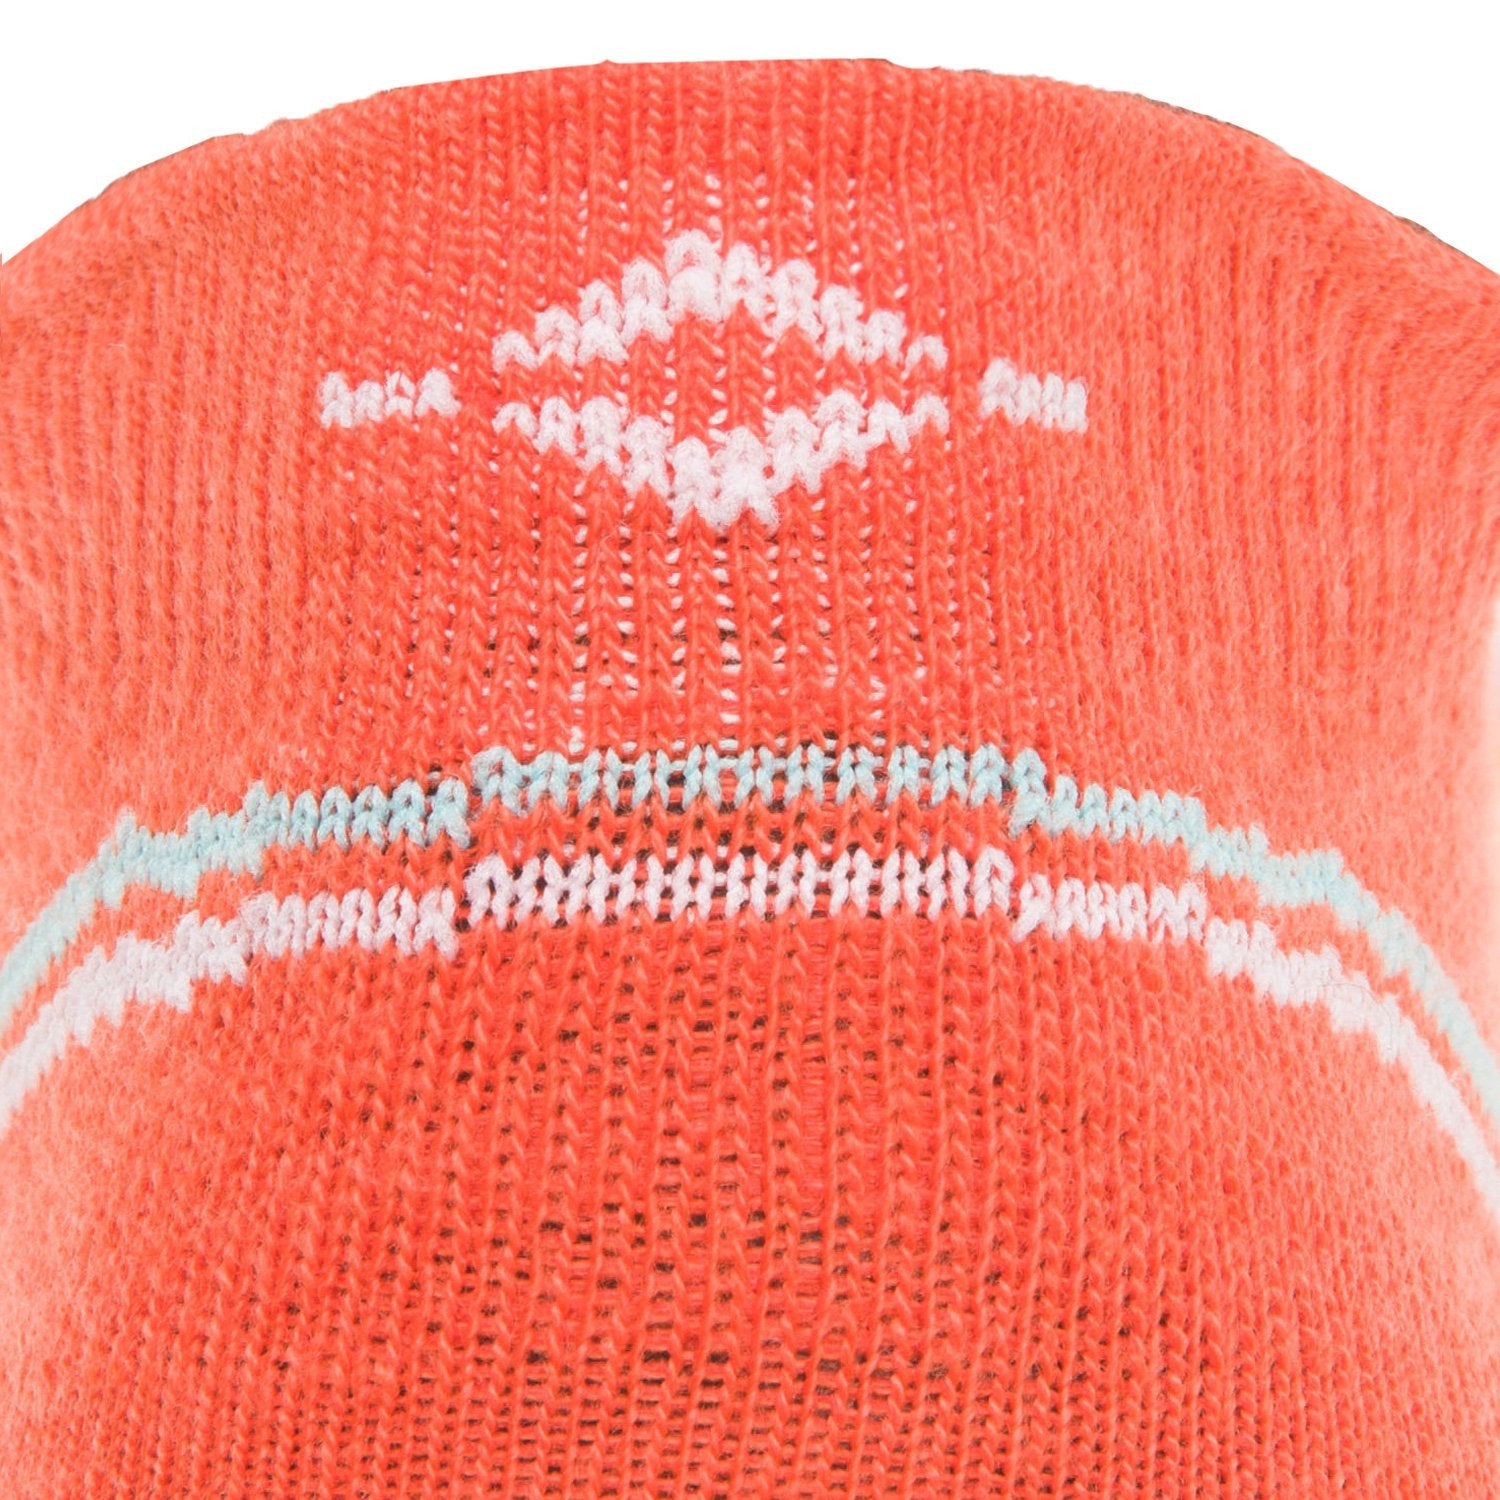 Surpass Ultra Lightweight Low Sock - Red/Orange cuff perspective - made in The USA Wigwam Socks